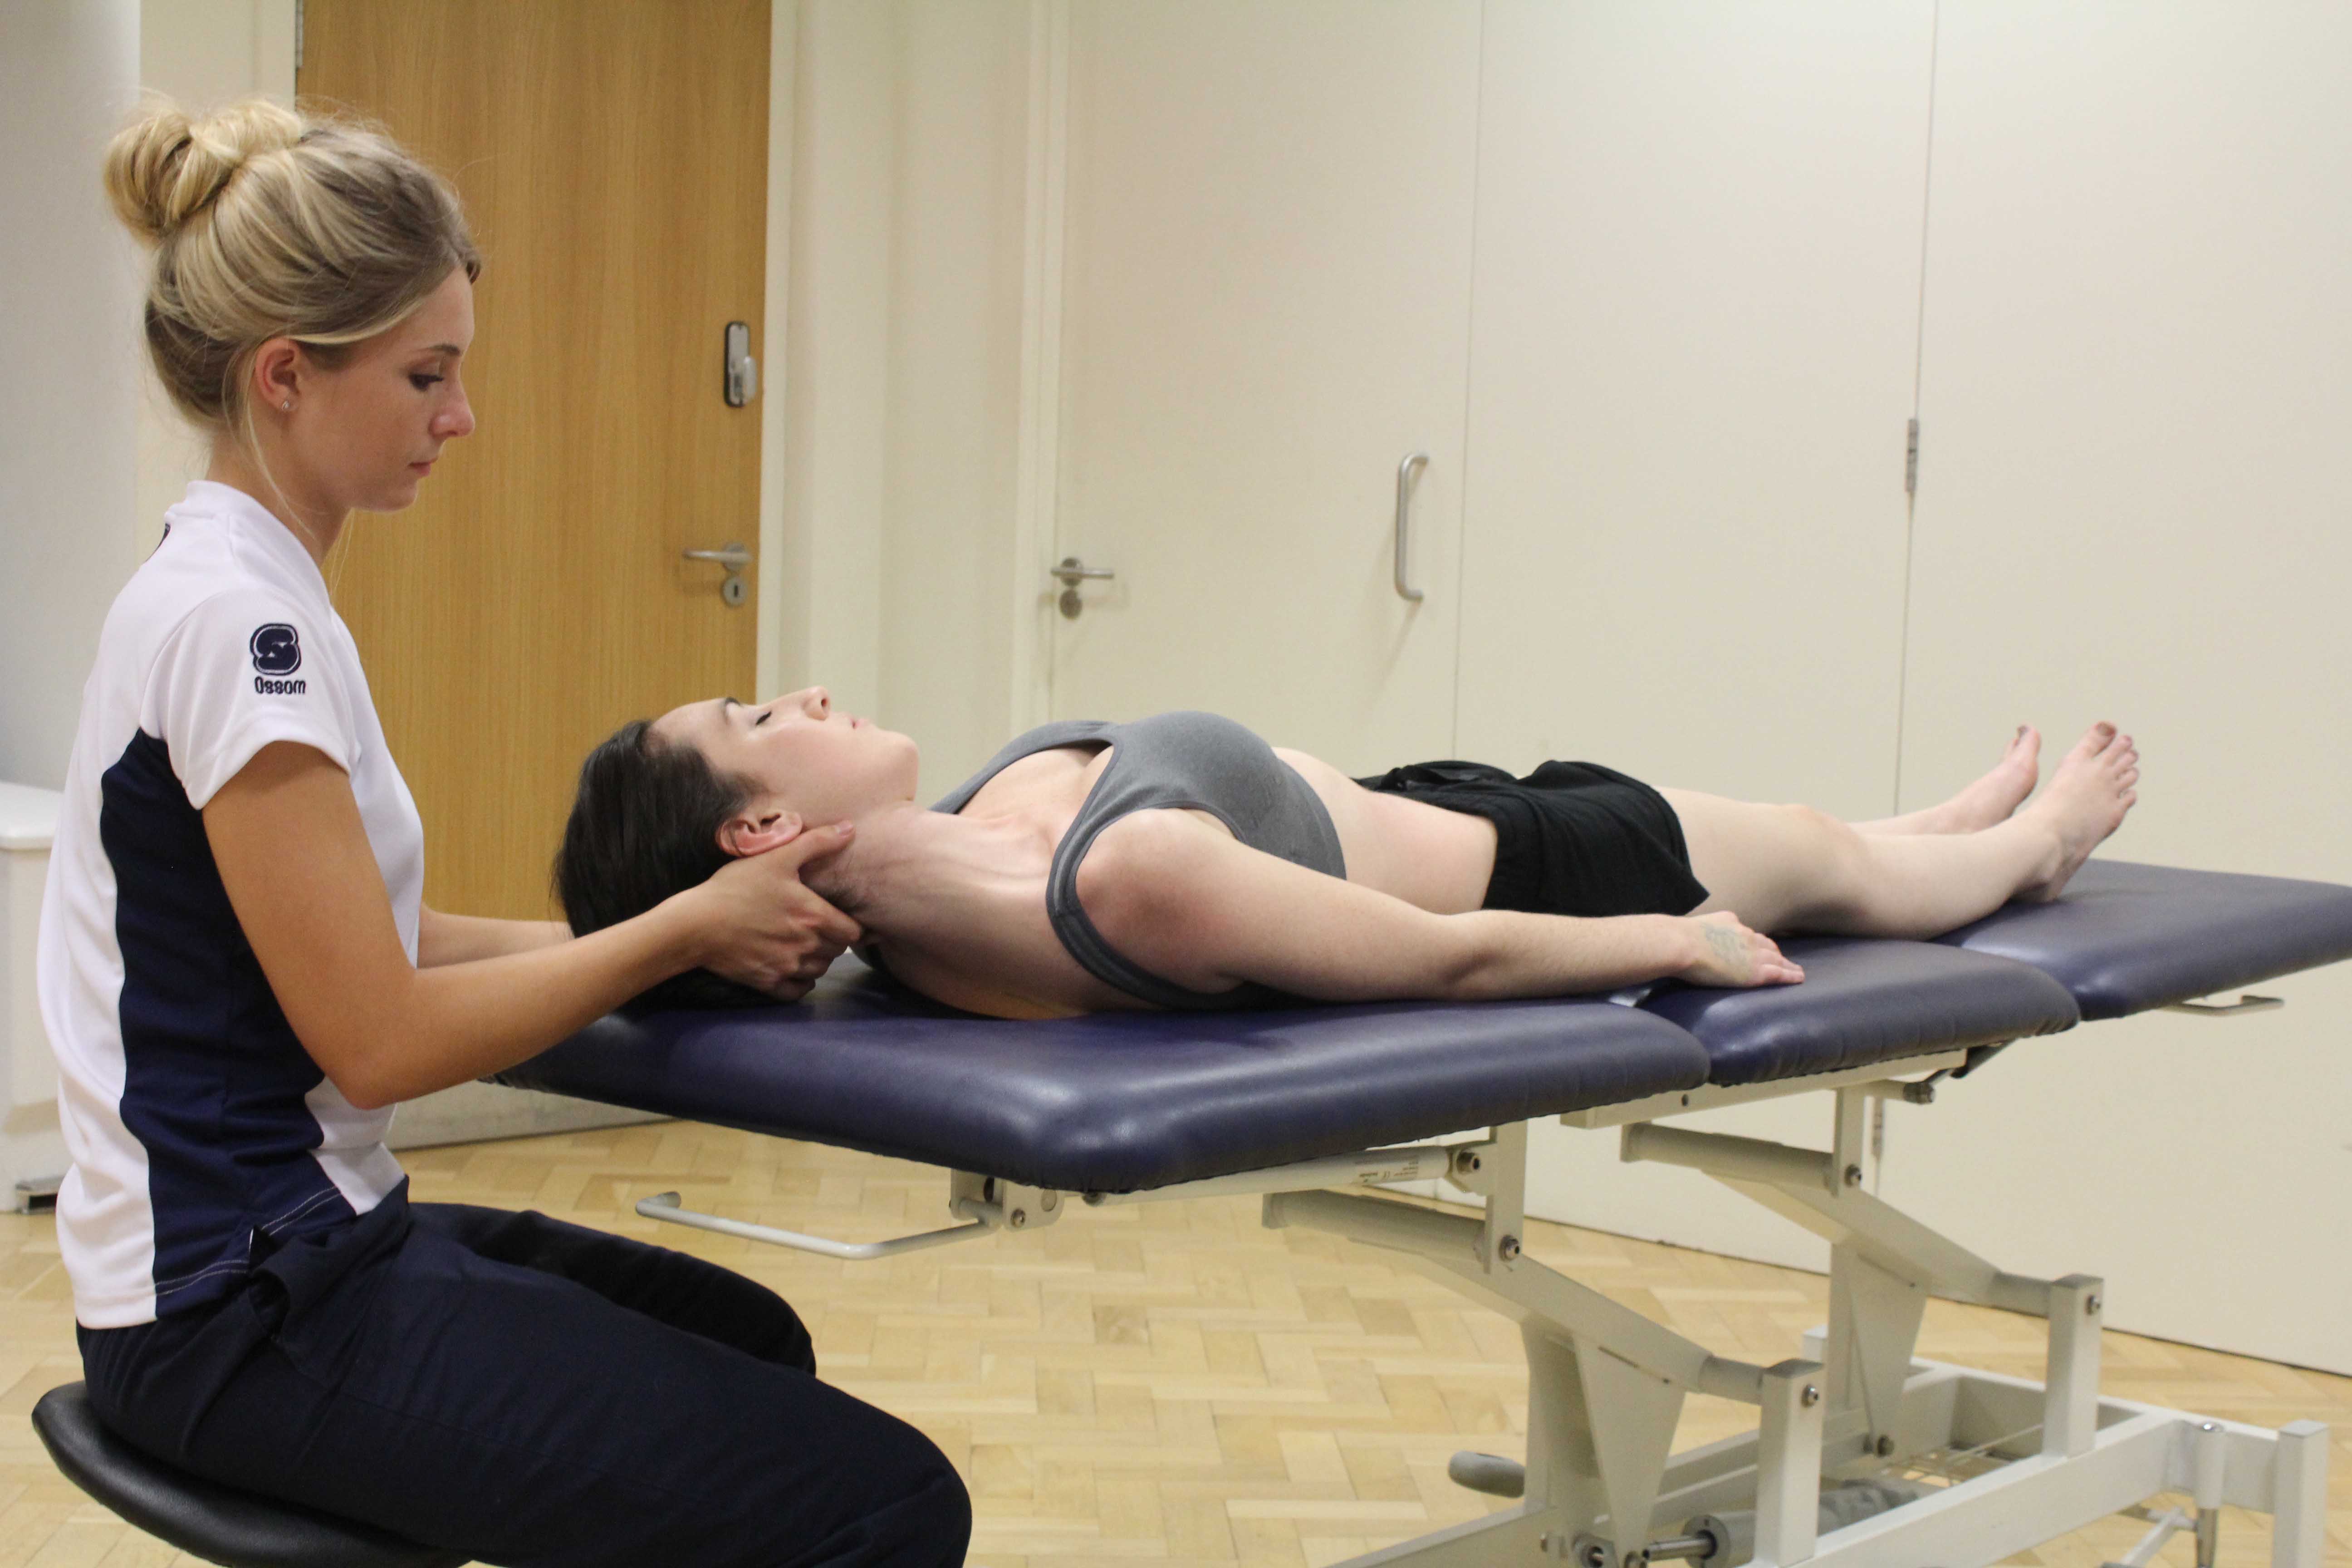 Stretches and realignment of the cervical spine by therapist